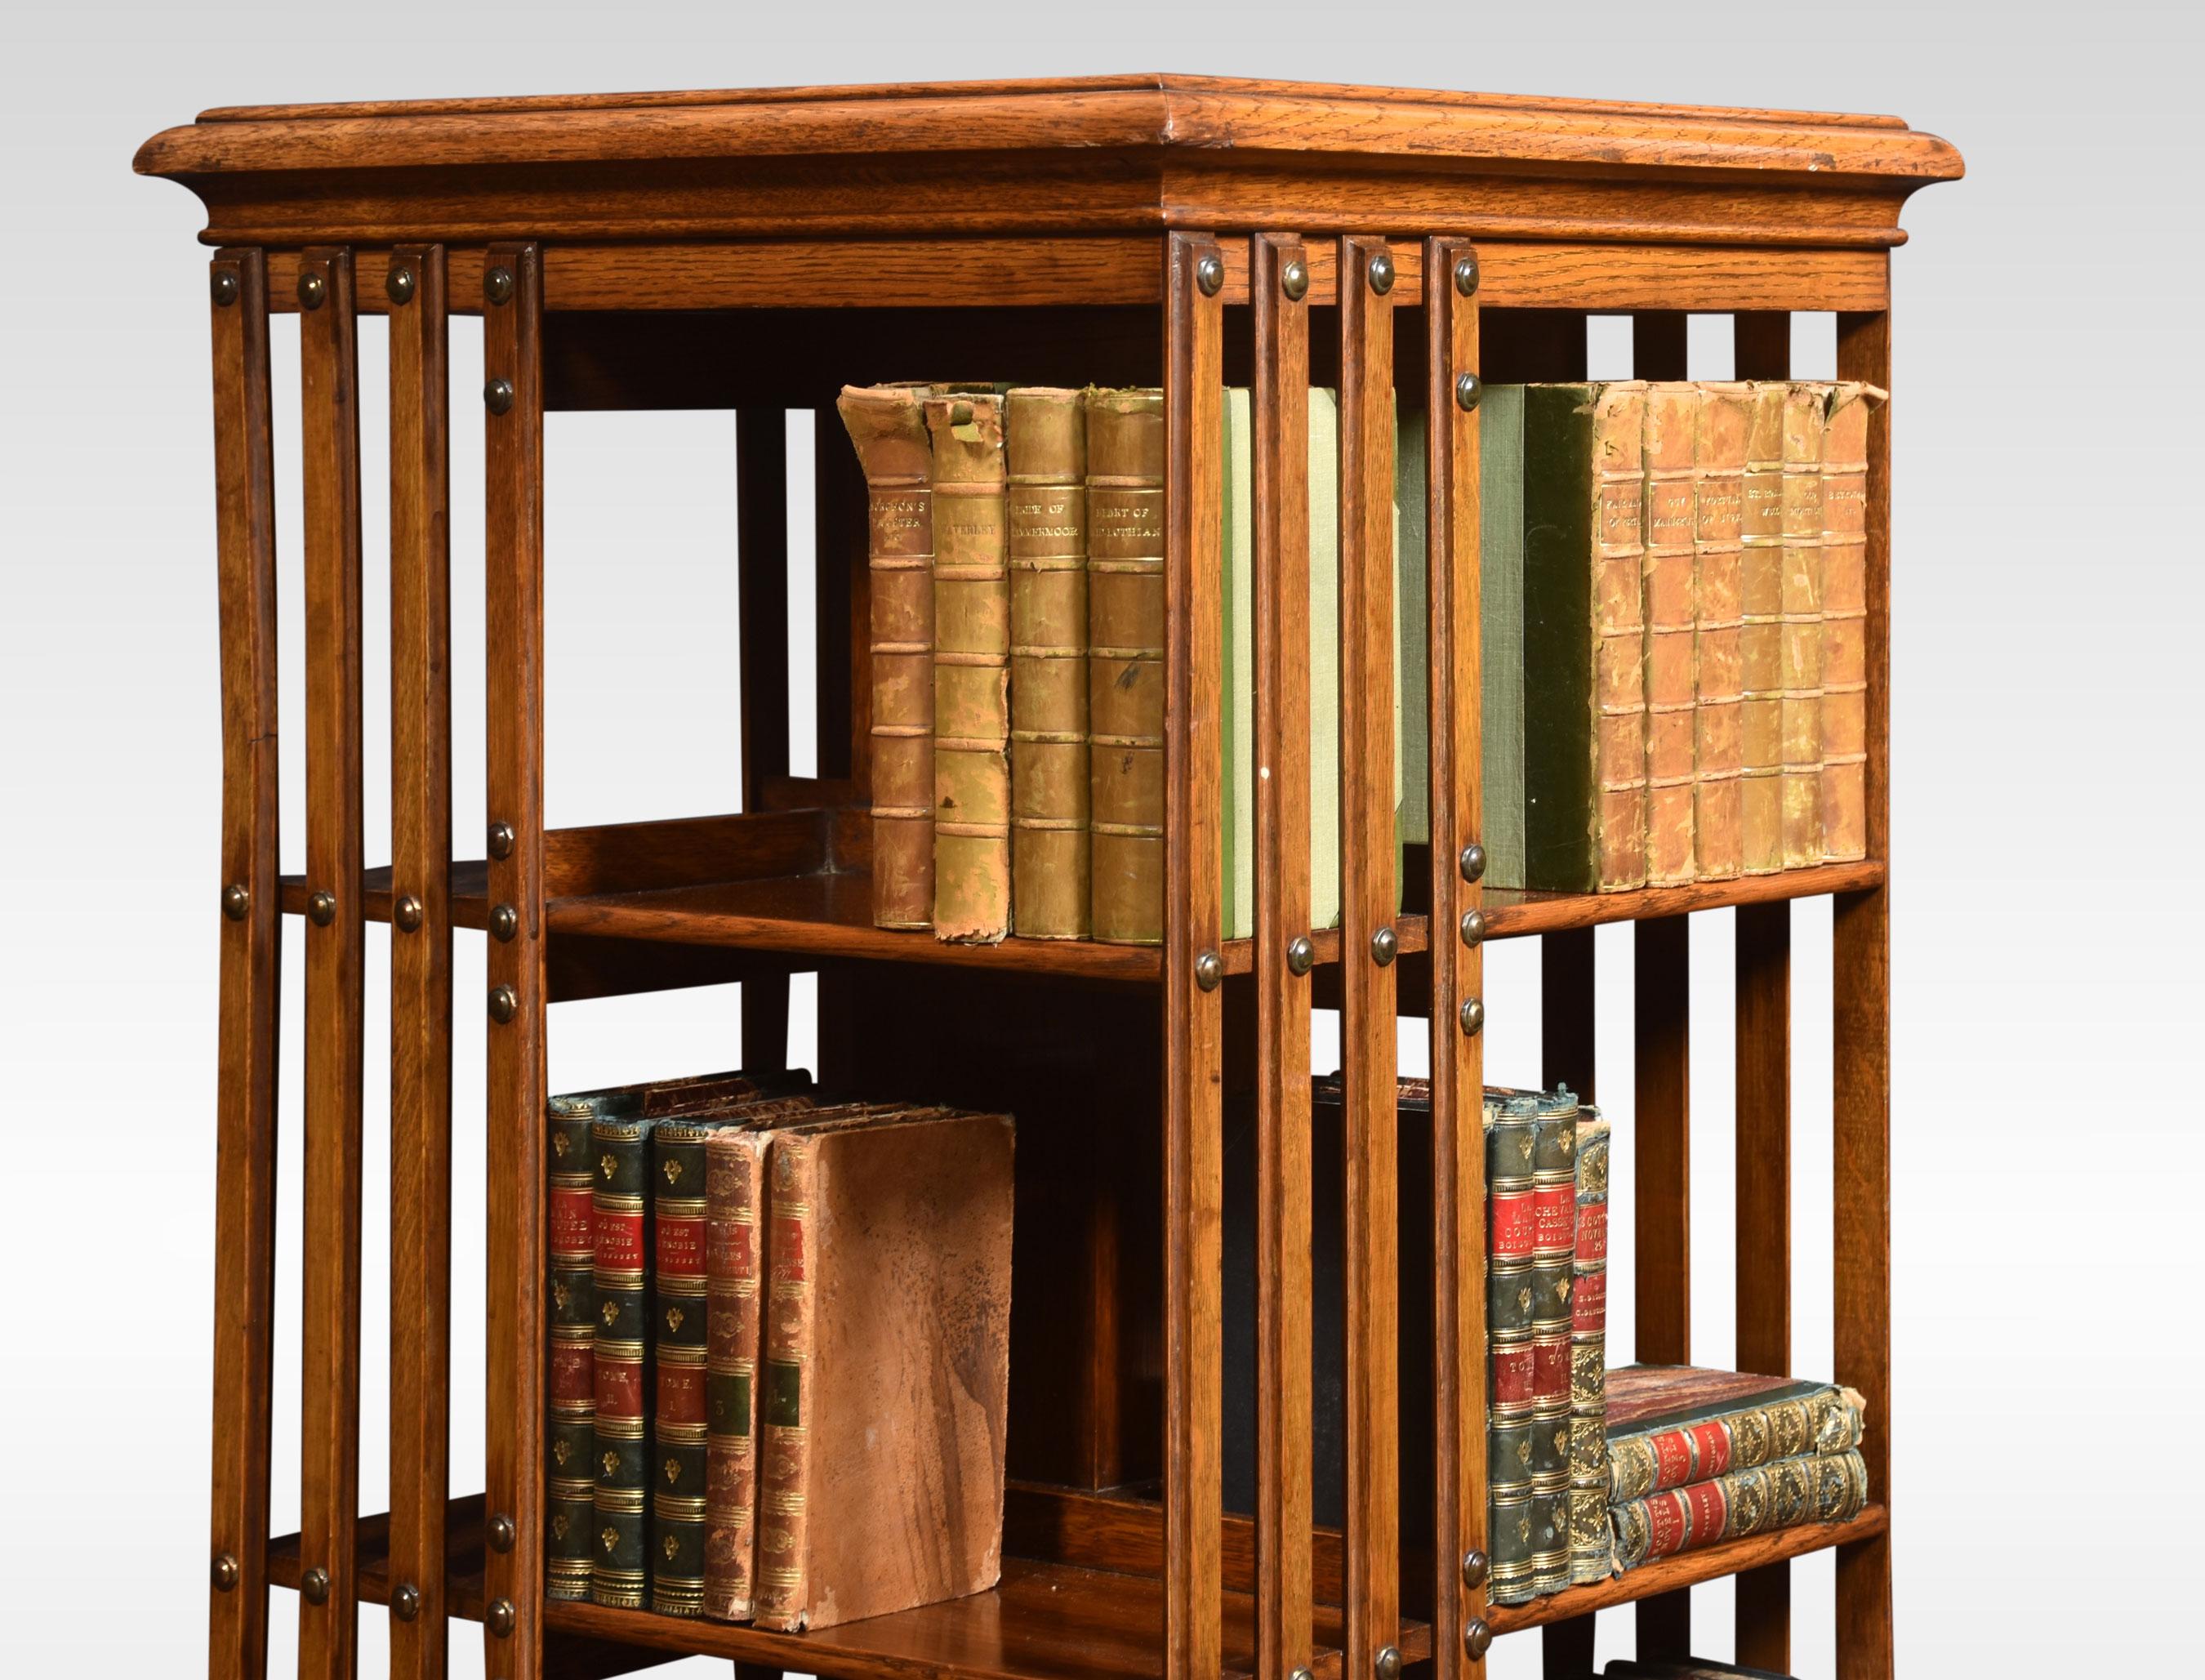 Large oak revolving bookcase the square molded top above four tiers with an arrangement of shelves raised up on cruciform base terminating in ceramic castors.
Dimensions
Height 50.5 inches
Width 20 inches
Depth 20 inches.